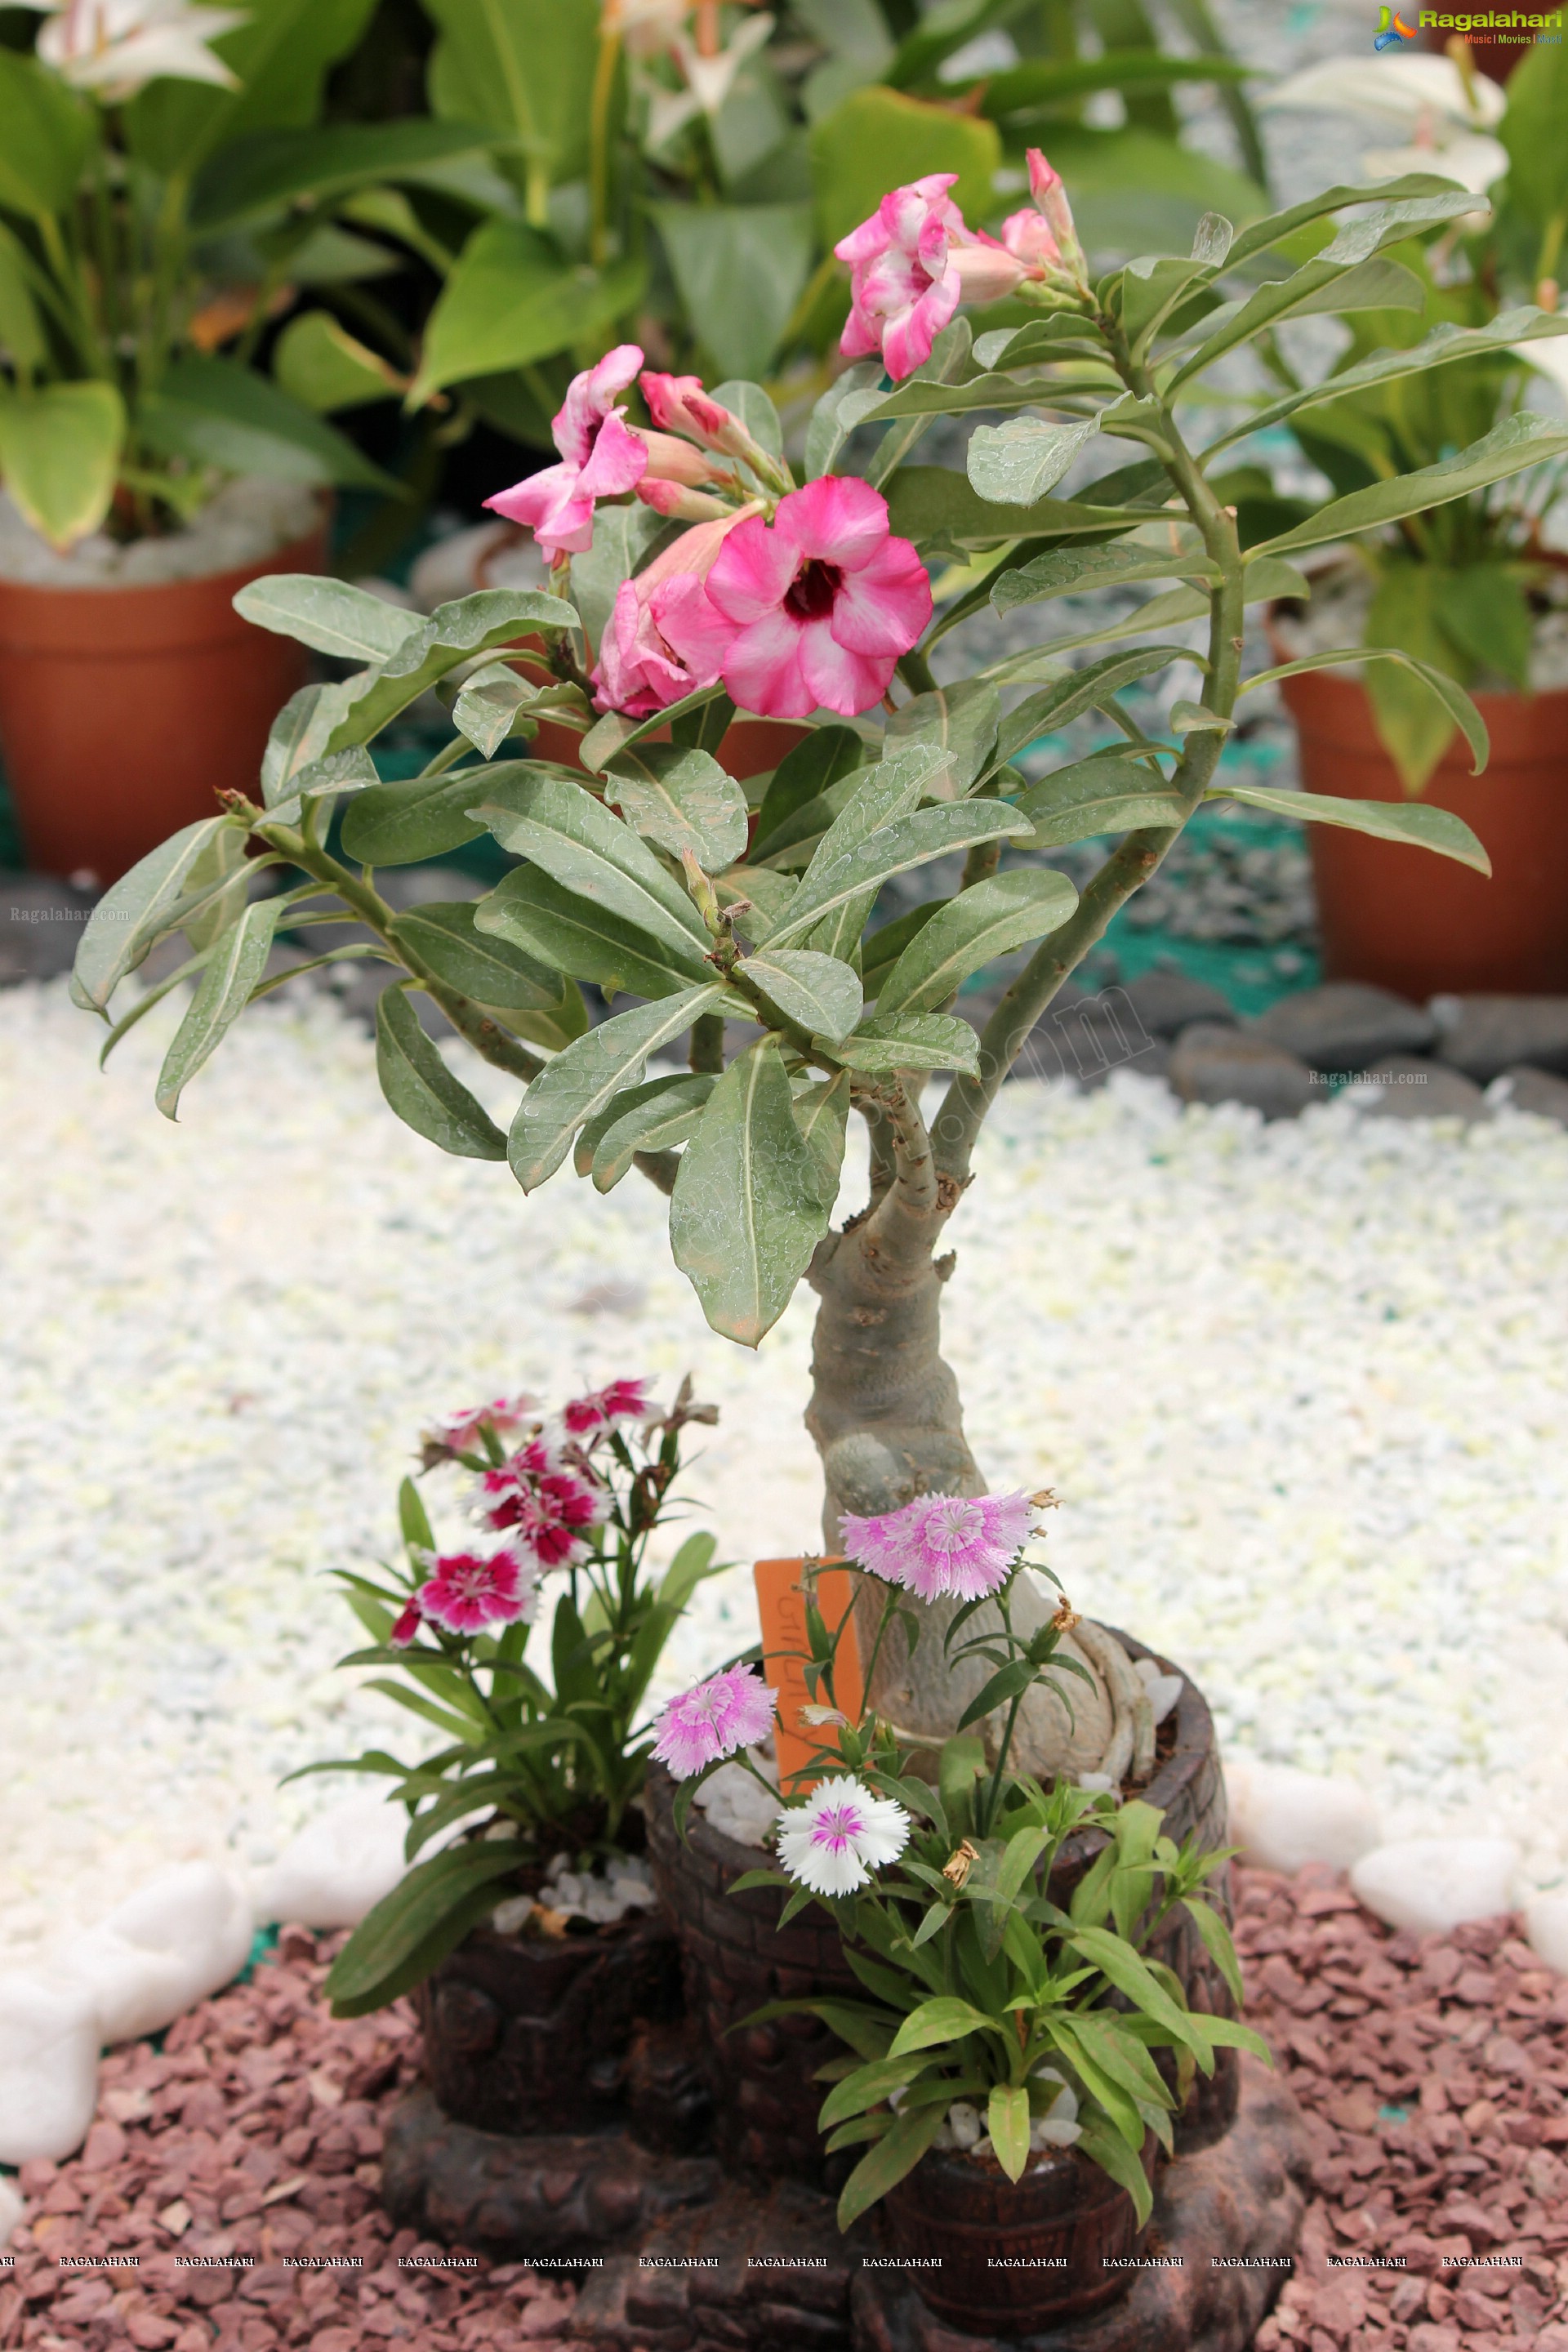 Lal Bagh Independence Day Flower Show (2012)